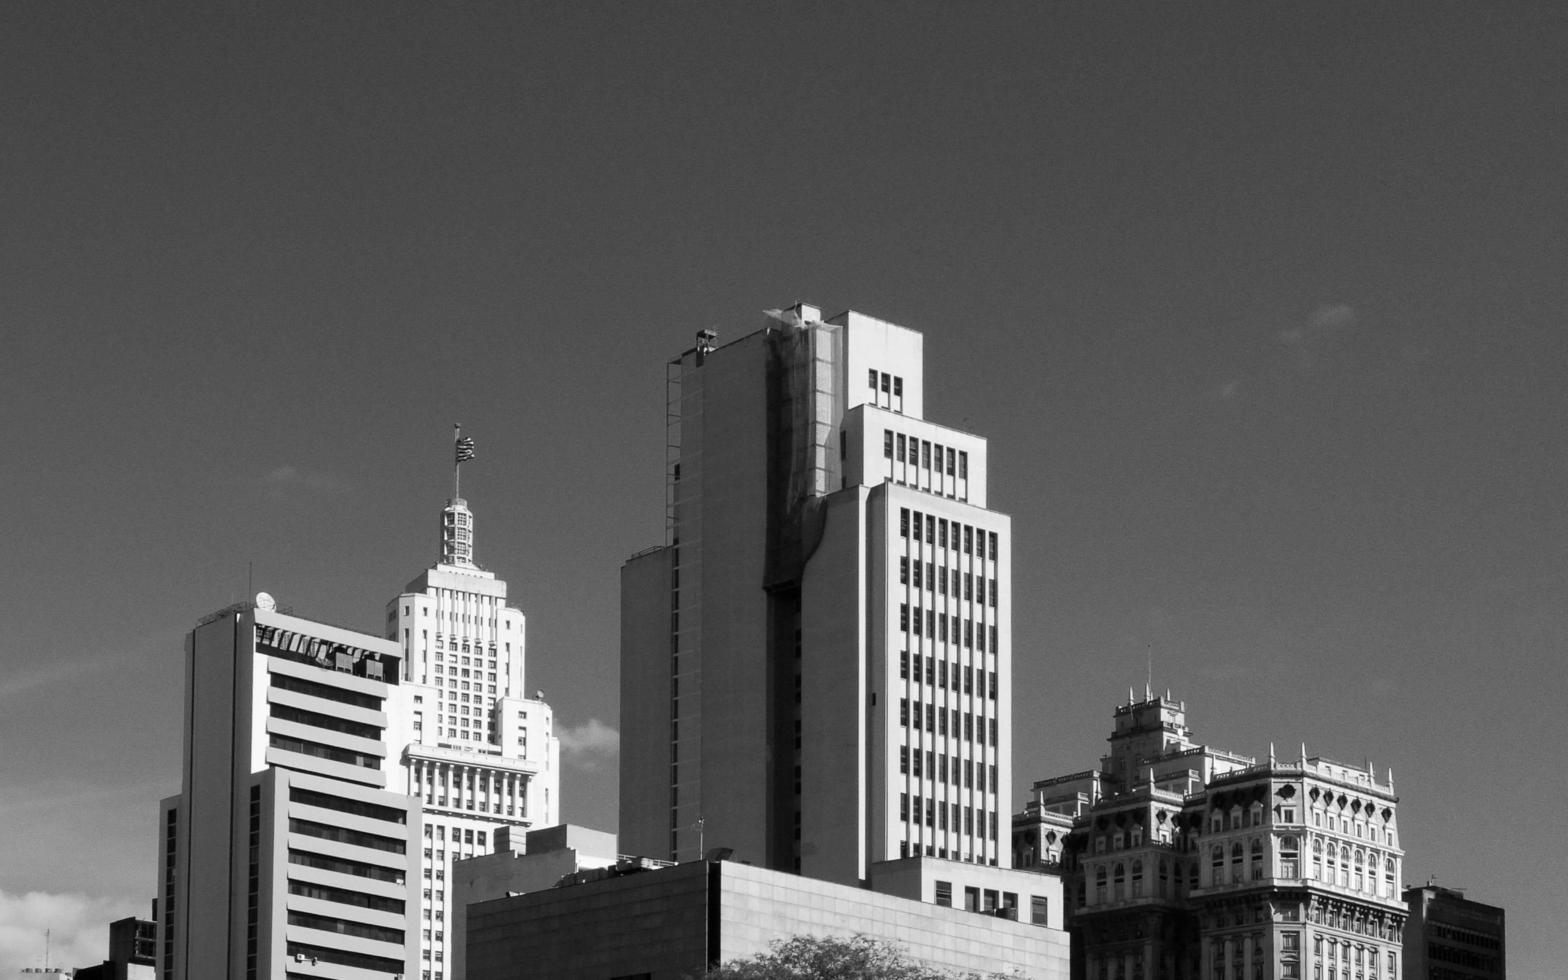 Grayscale photo of city buildings